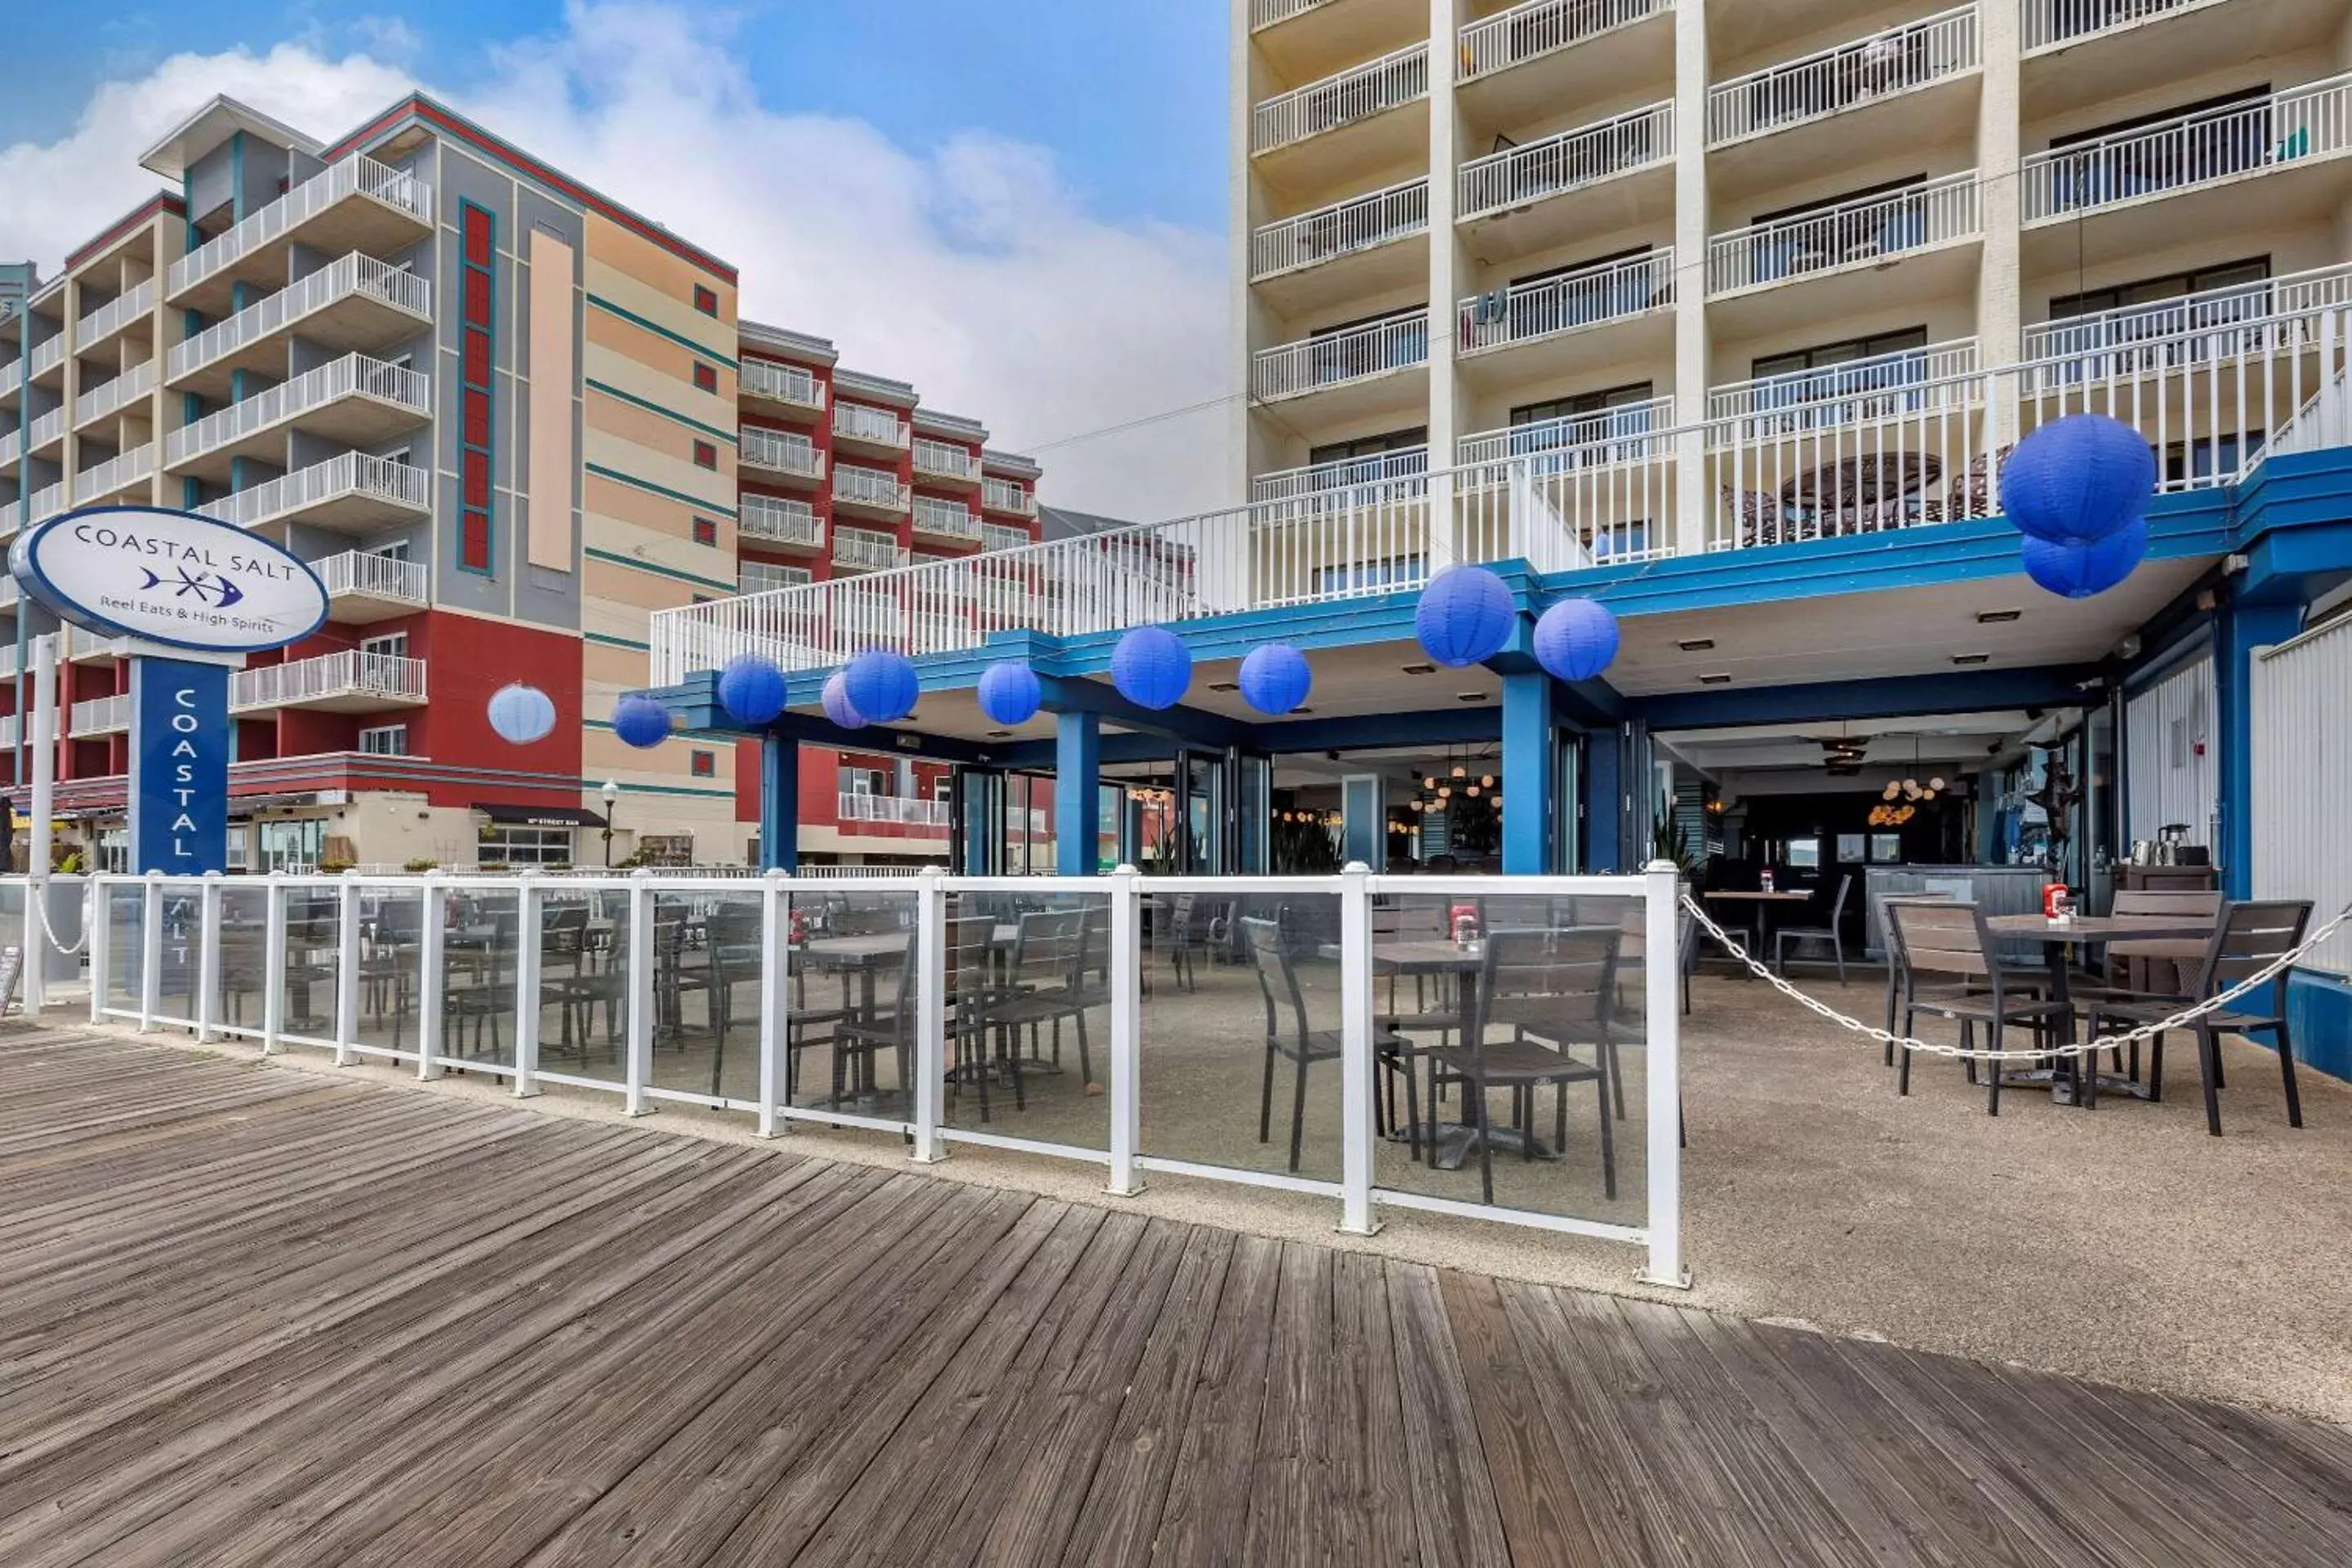 Restaurant/places to eat, Property Building in Quality Inn Boardwalk